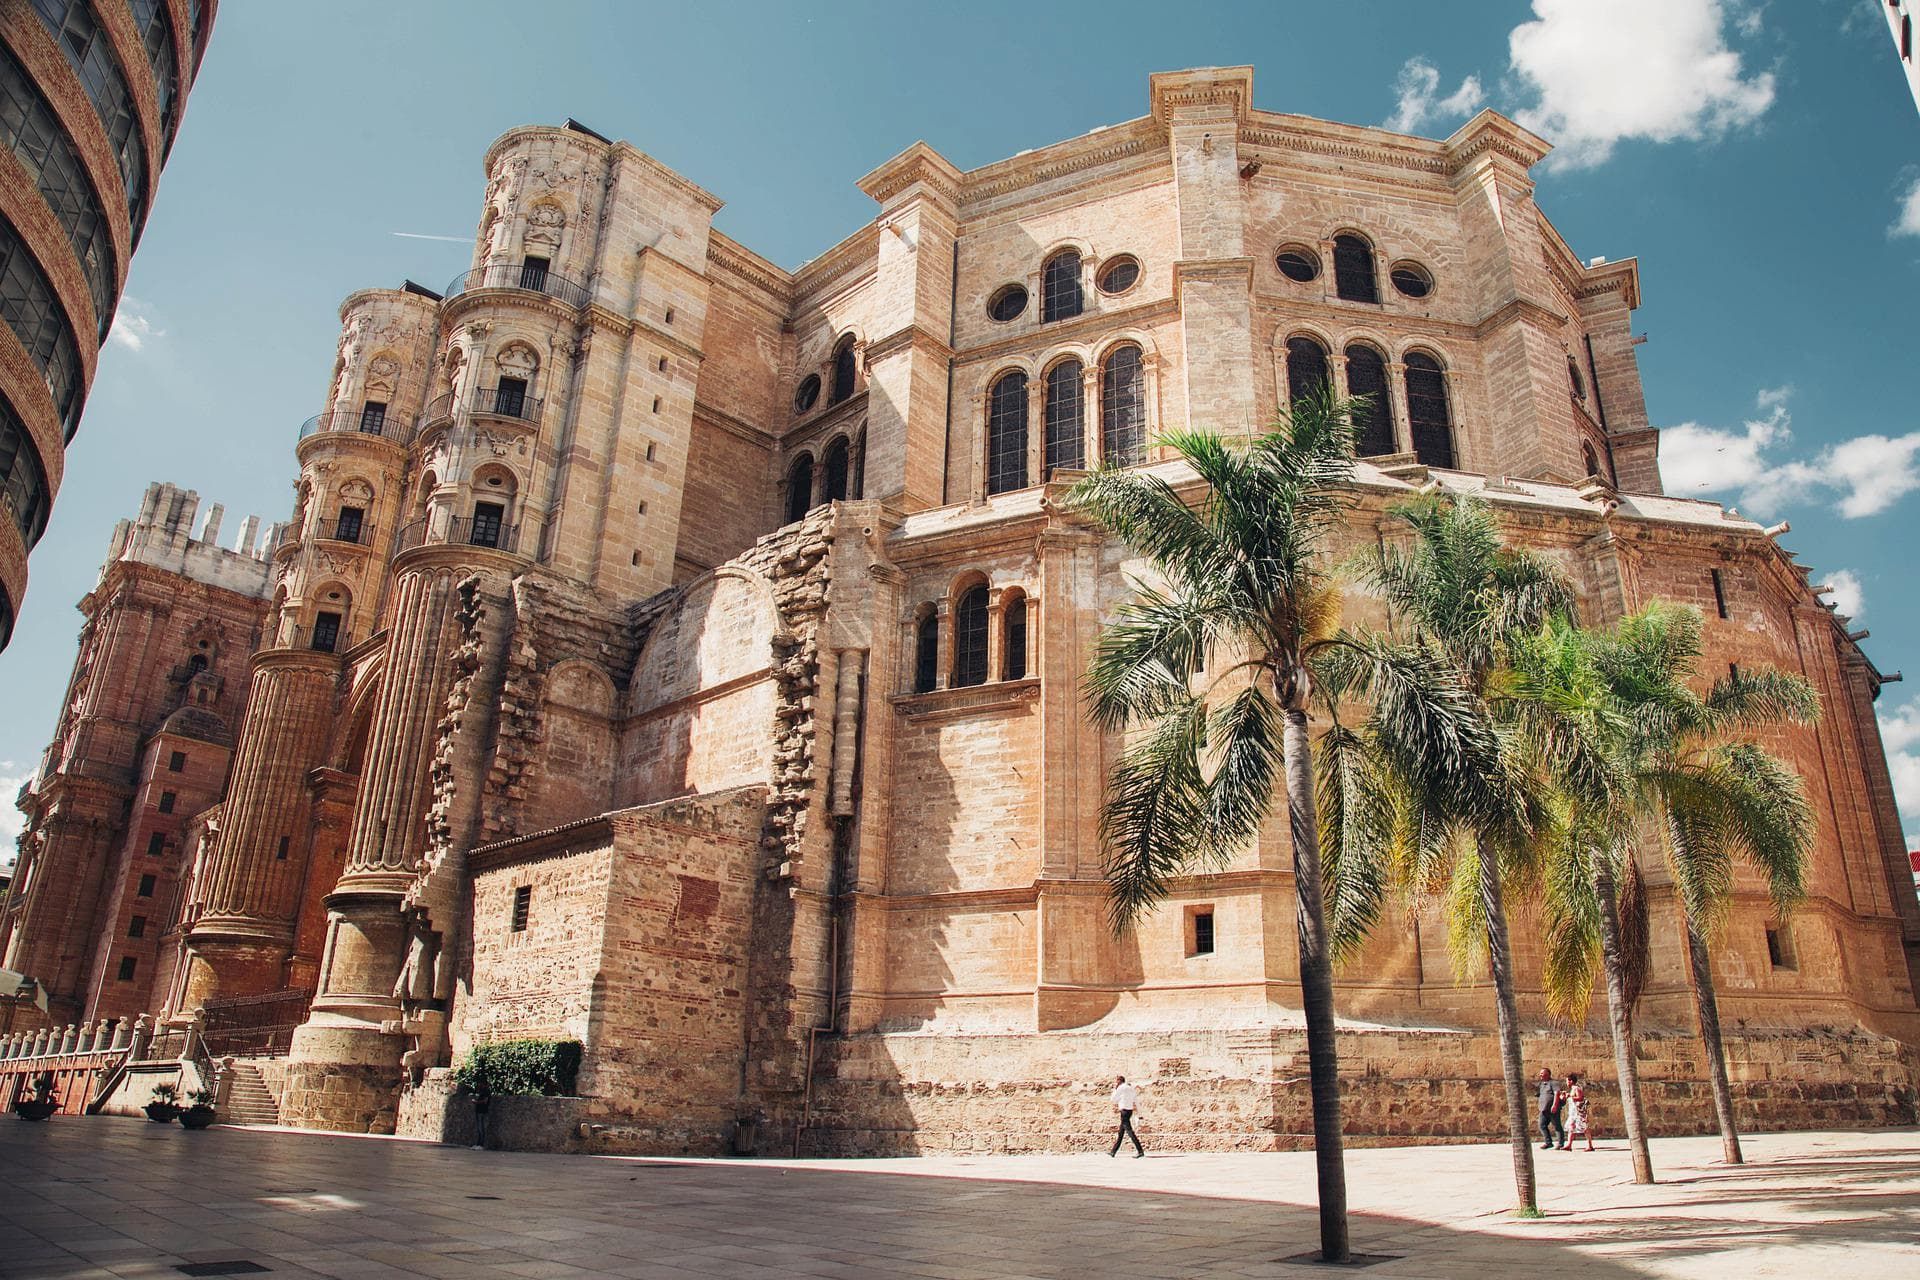 Things to do and see in Malaga in 2 days